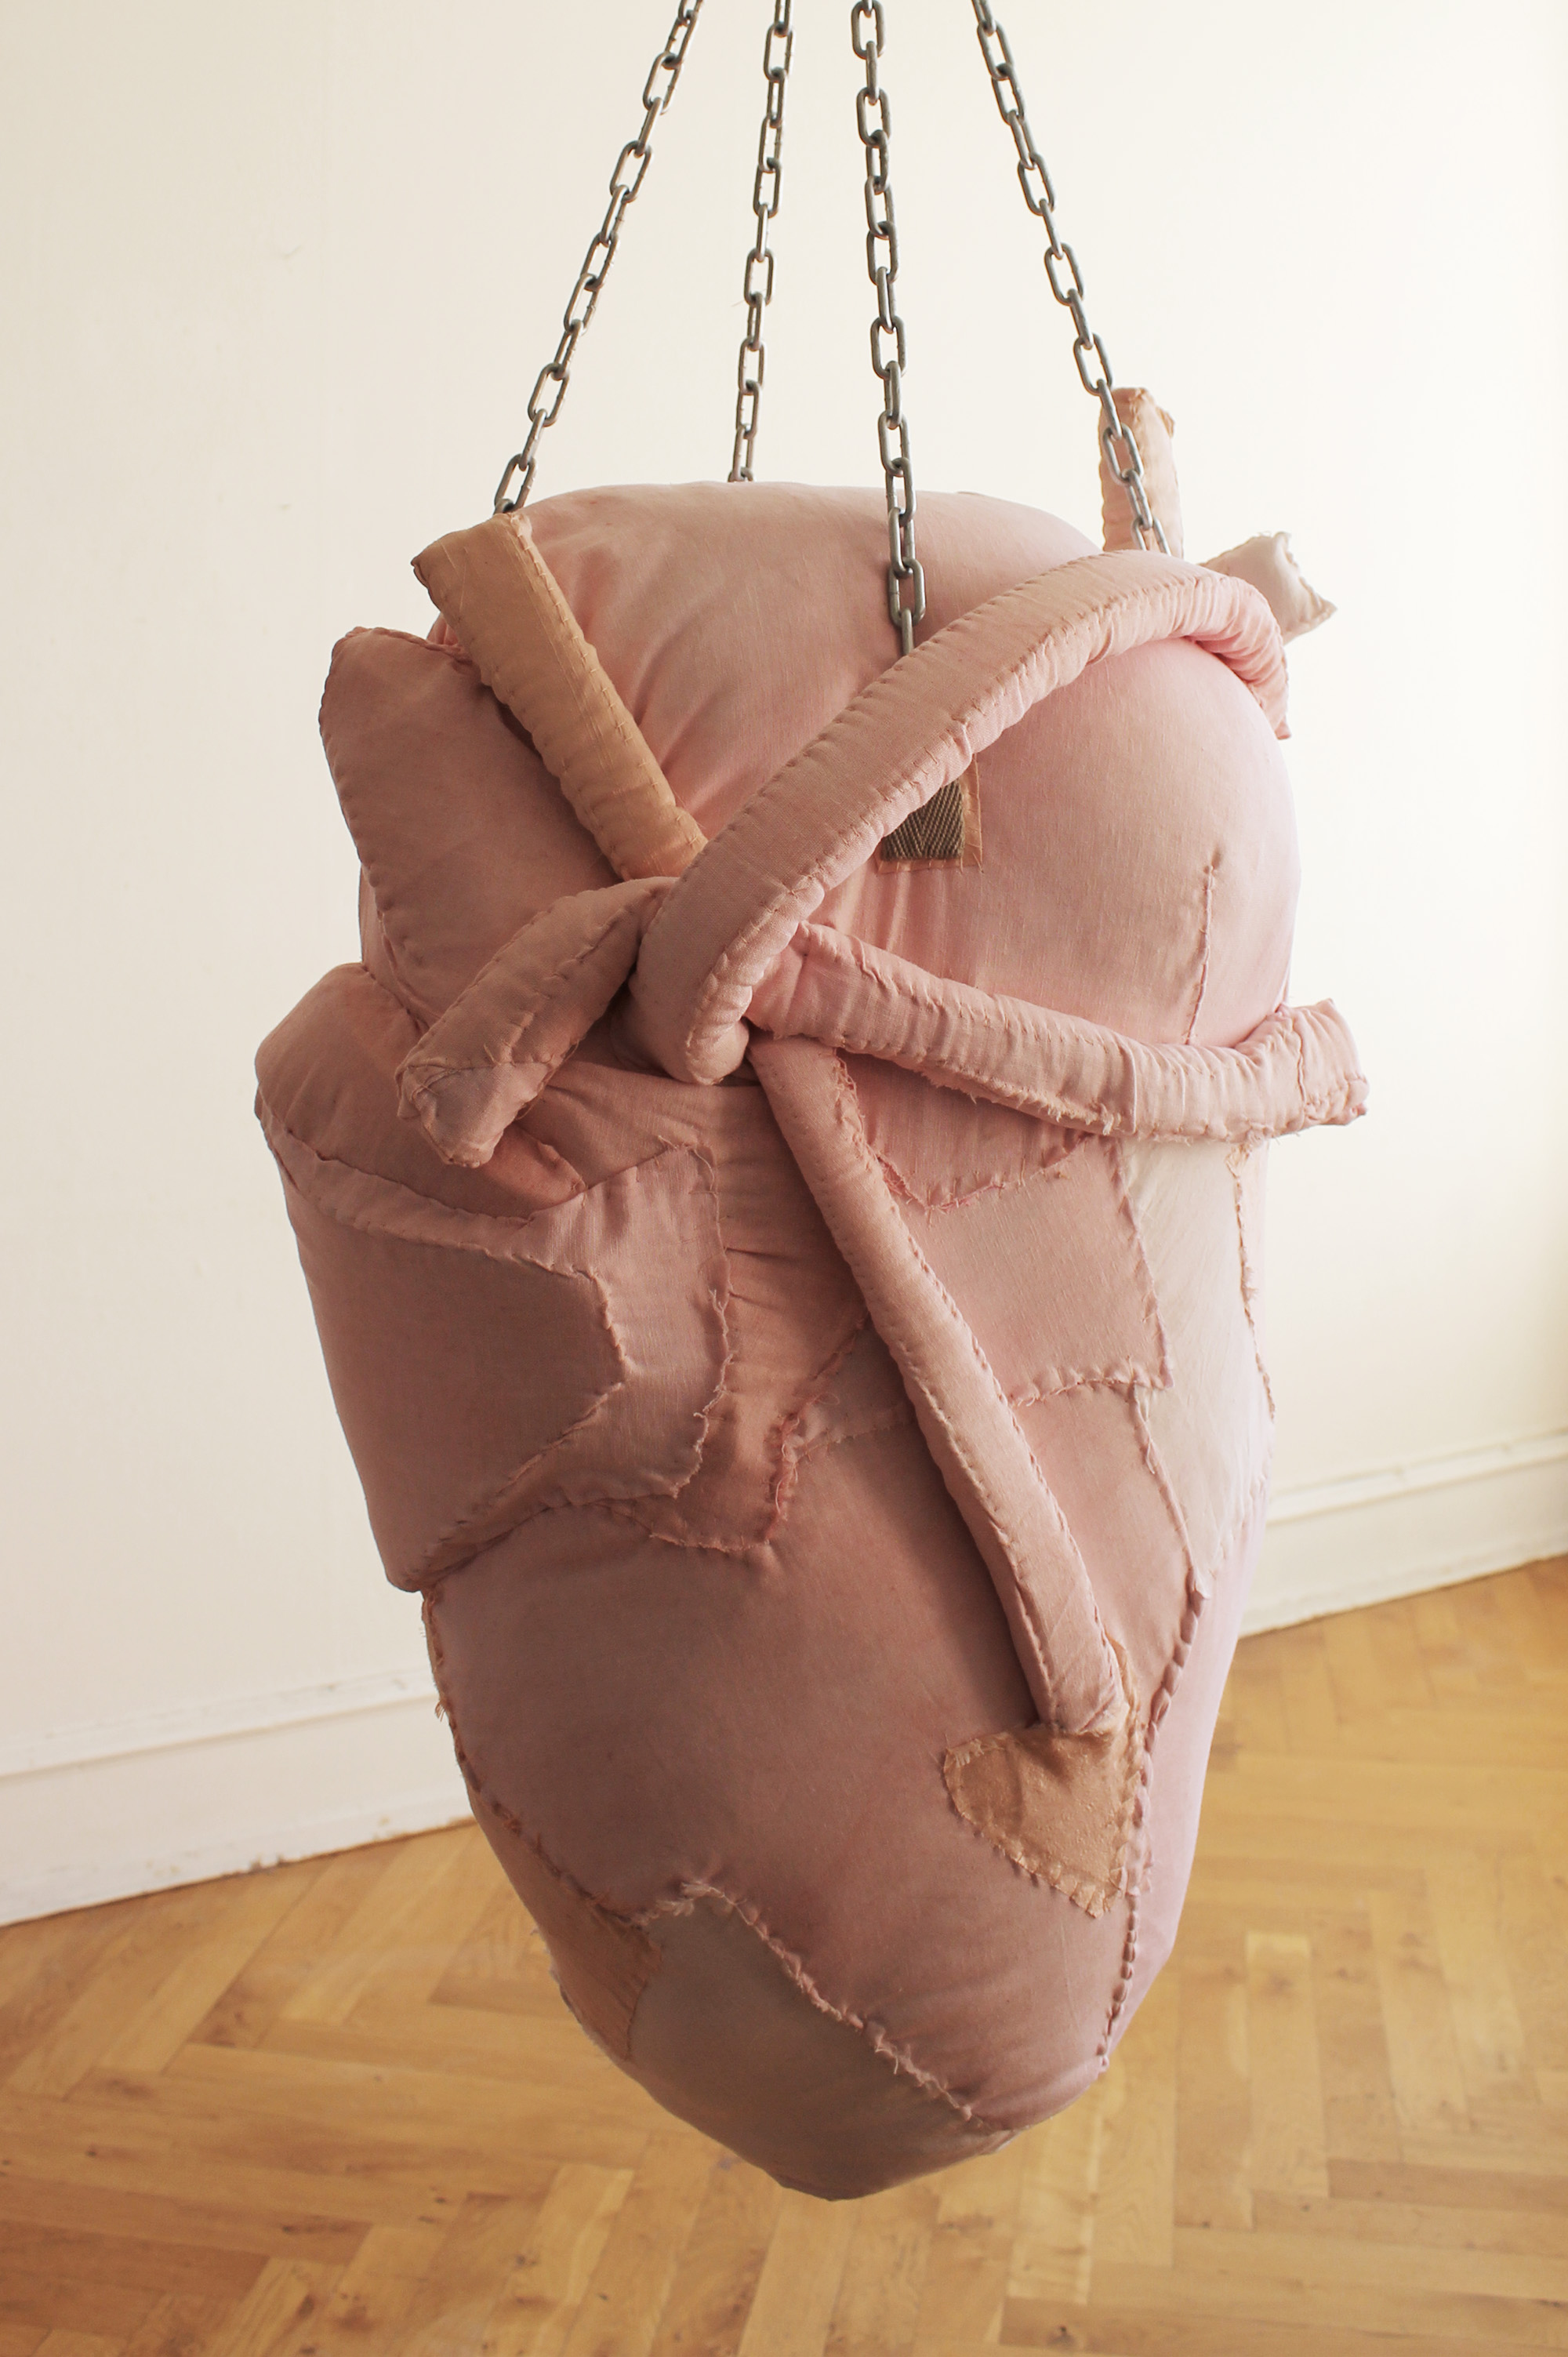  Anatomical heart punchbag. 2017  Textile,embroidery,iron chain.  70x40x50cm 